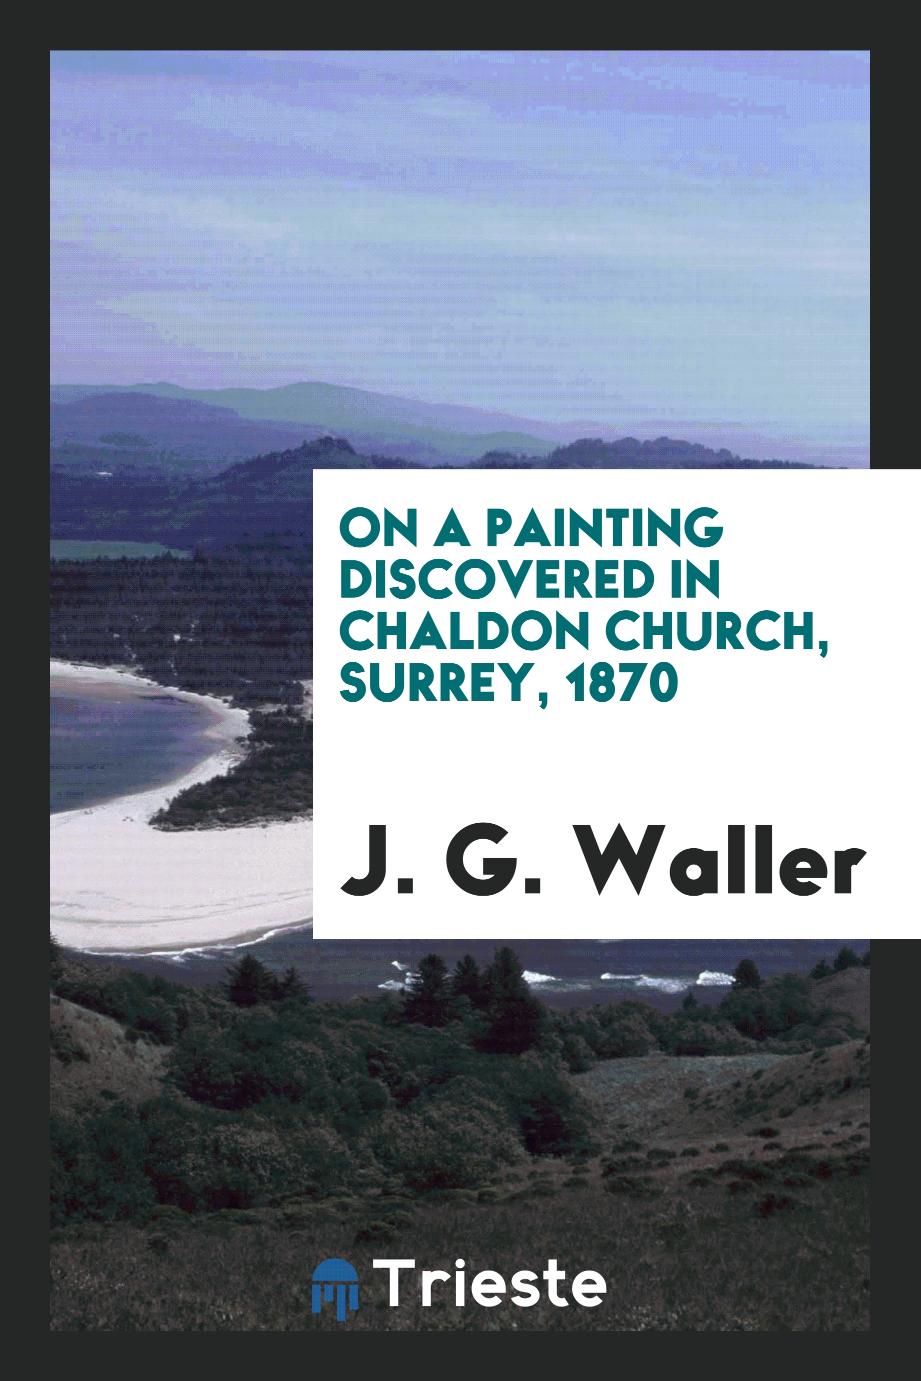 On a painting discovered in Chaldon Church, Surrey, 1870